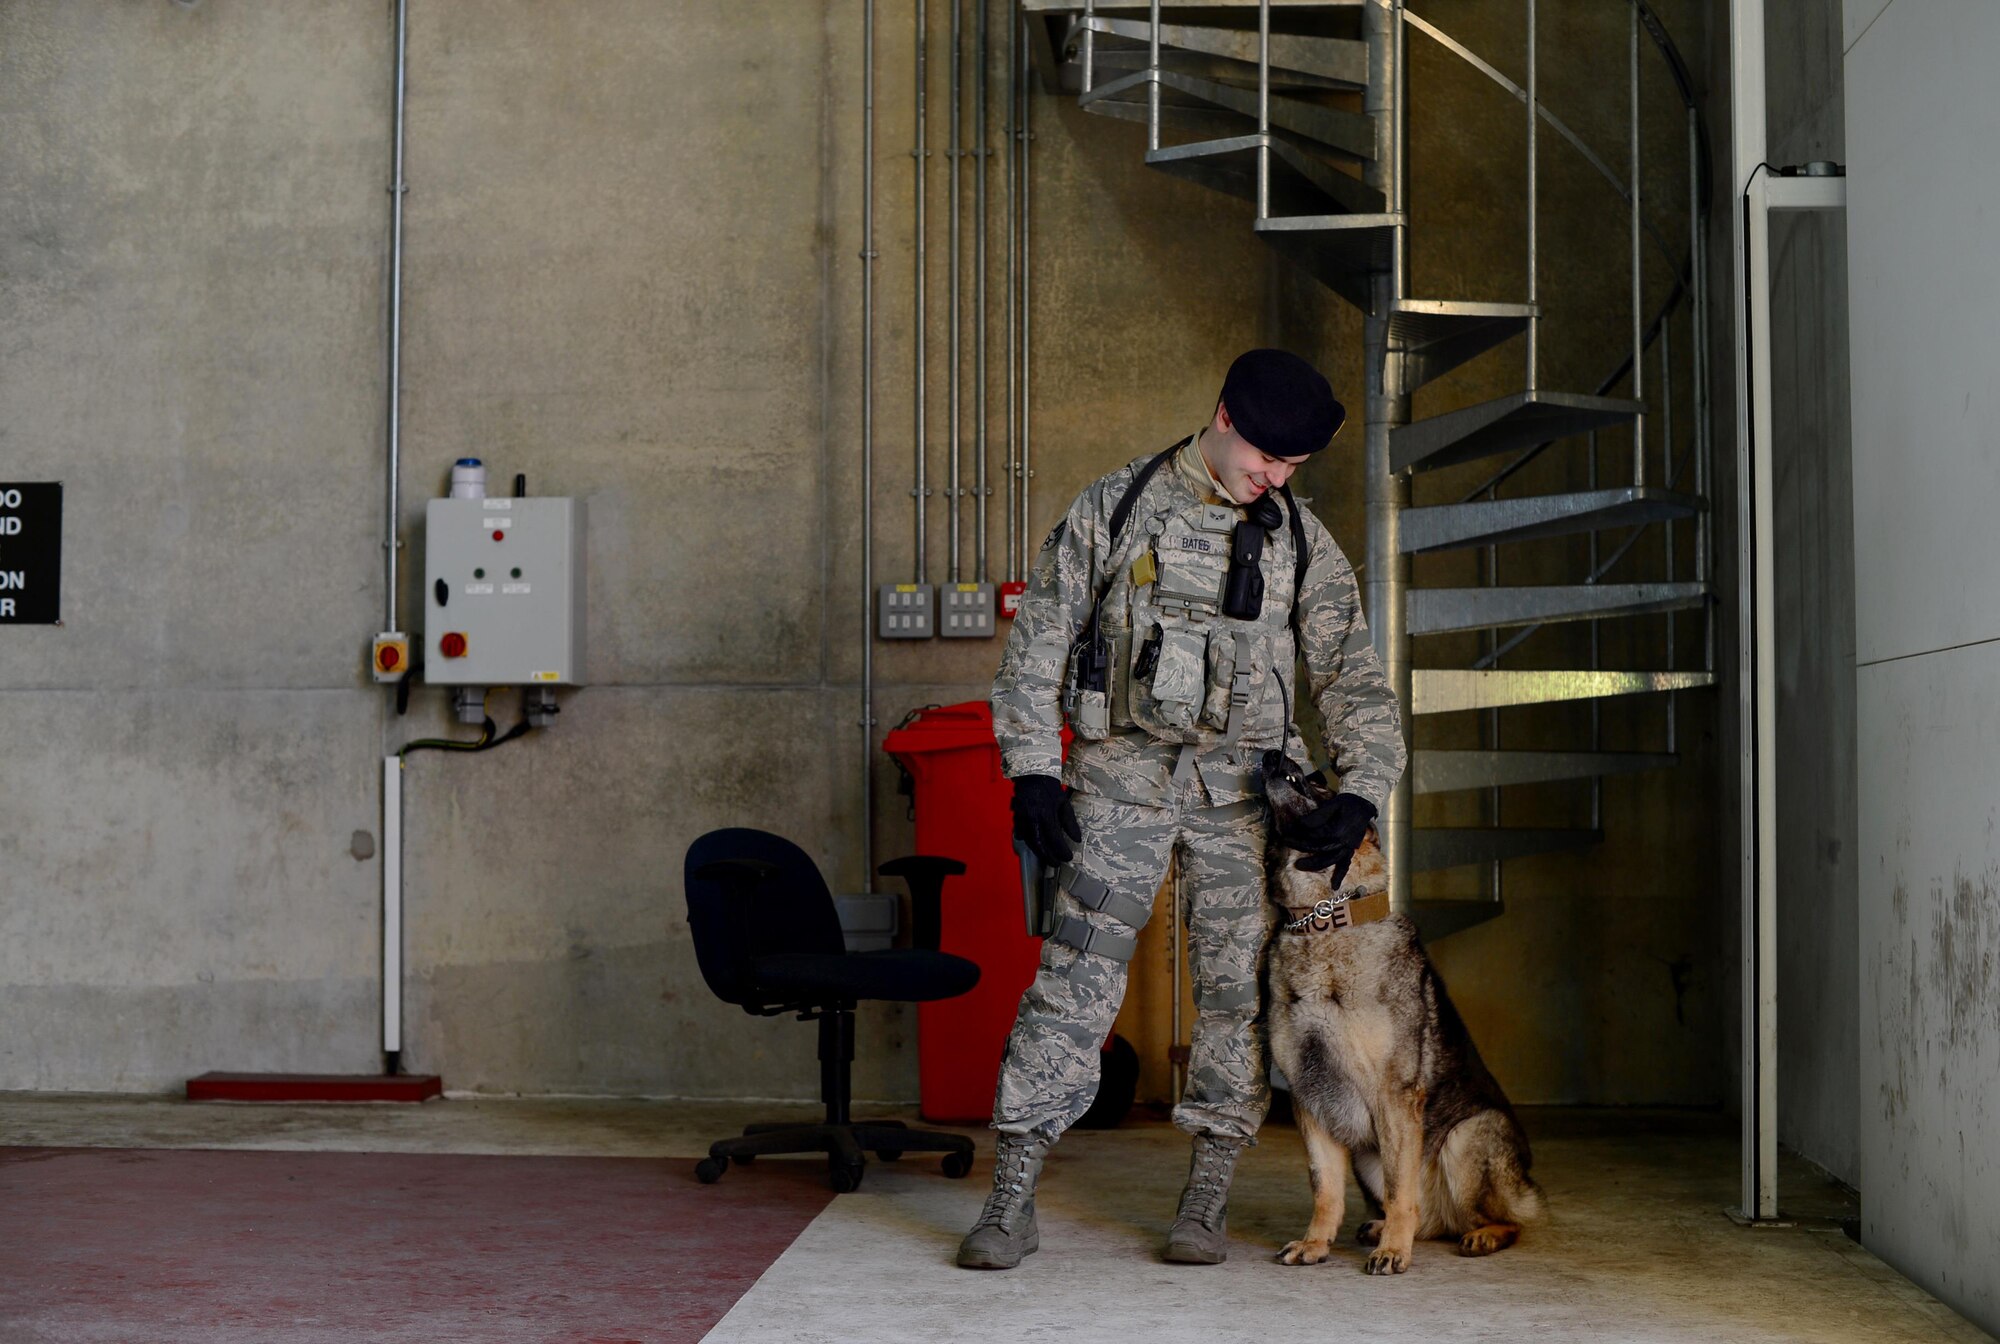 Senior Airman Bryce Bates, a 48th Security Forces Squadron military working dog handler, interacts with his teammate, Gina, before a vehicle inspection at Royal Air Force Lakenheath, England, April 11, 2016. Bates has been providing additional care for Gina after a cancerous tumor was recently removed from her mouth. (U.S. Air Force photo/Senior Airman Erin Trower)